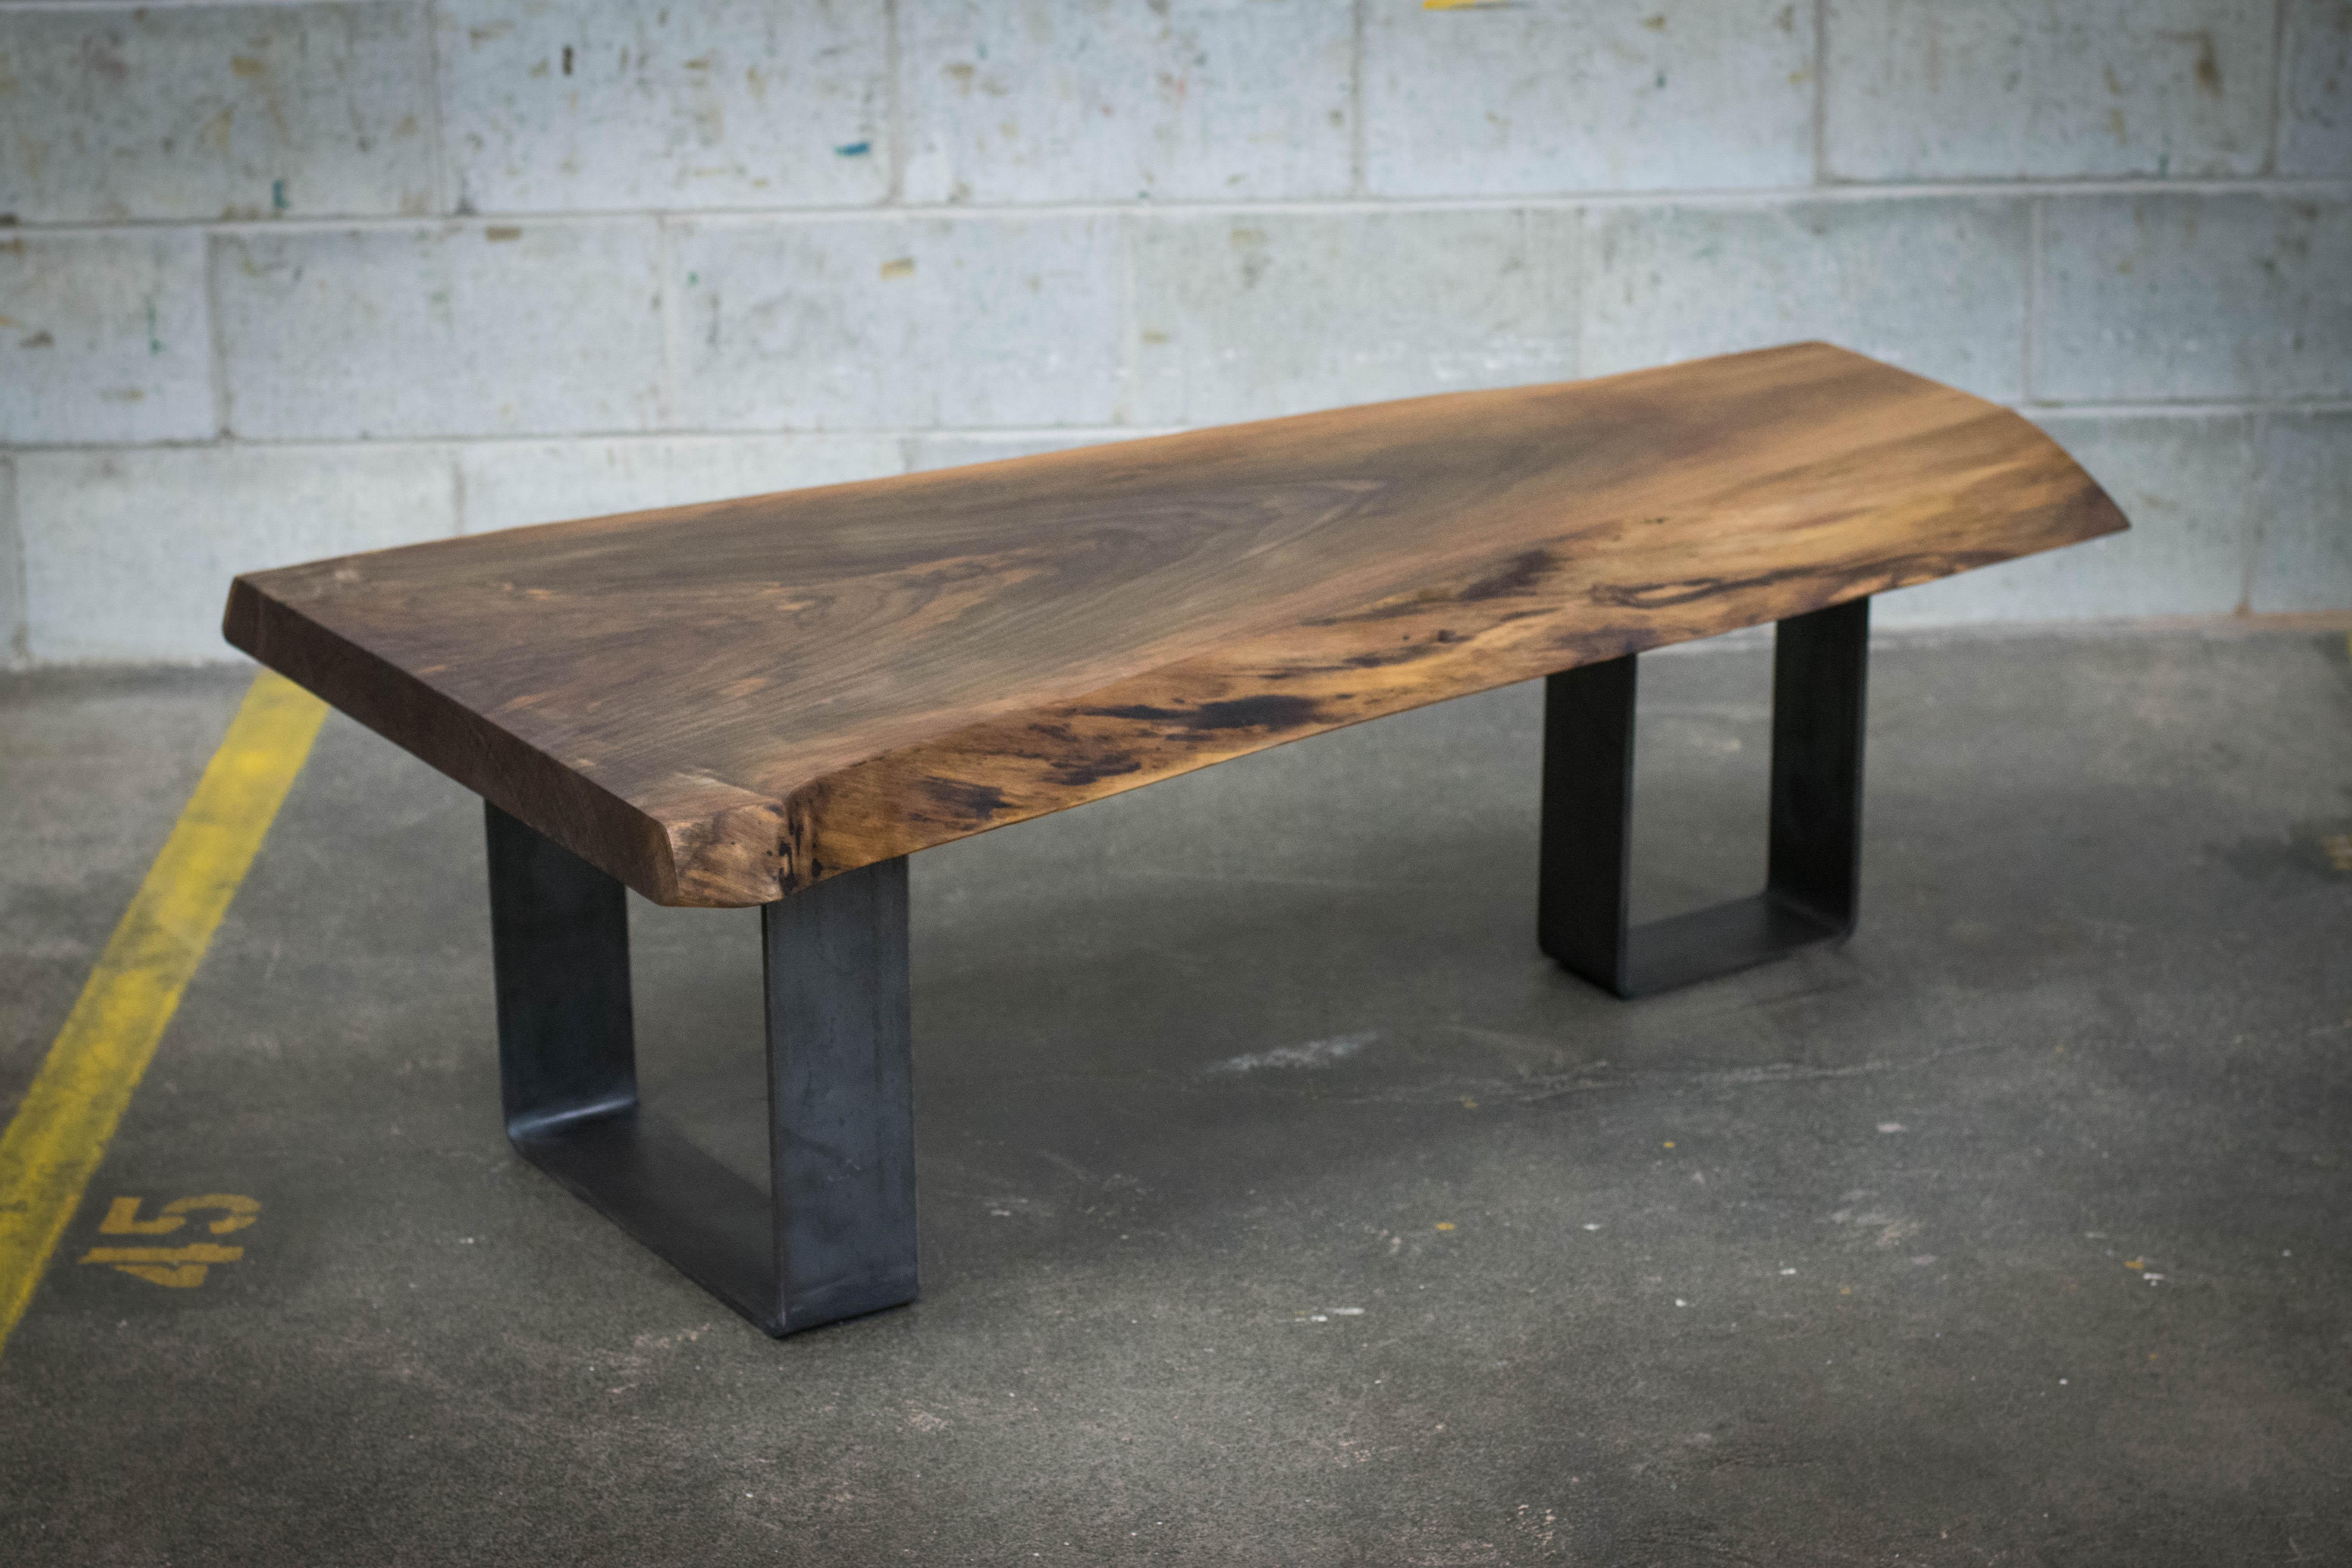 This black walnut coffee table uses a single live edge slab. This coffee table is made to order. The legs are made using steel flat bars 3in wide so even perpendicular, the table is very stable. Keep in mind we can offer any style of base. We offer